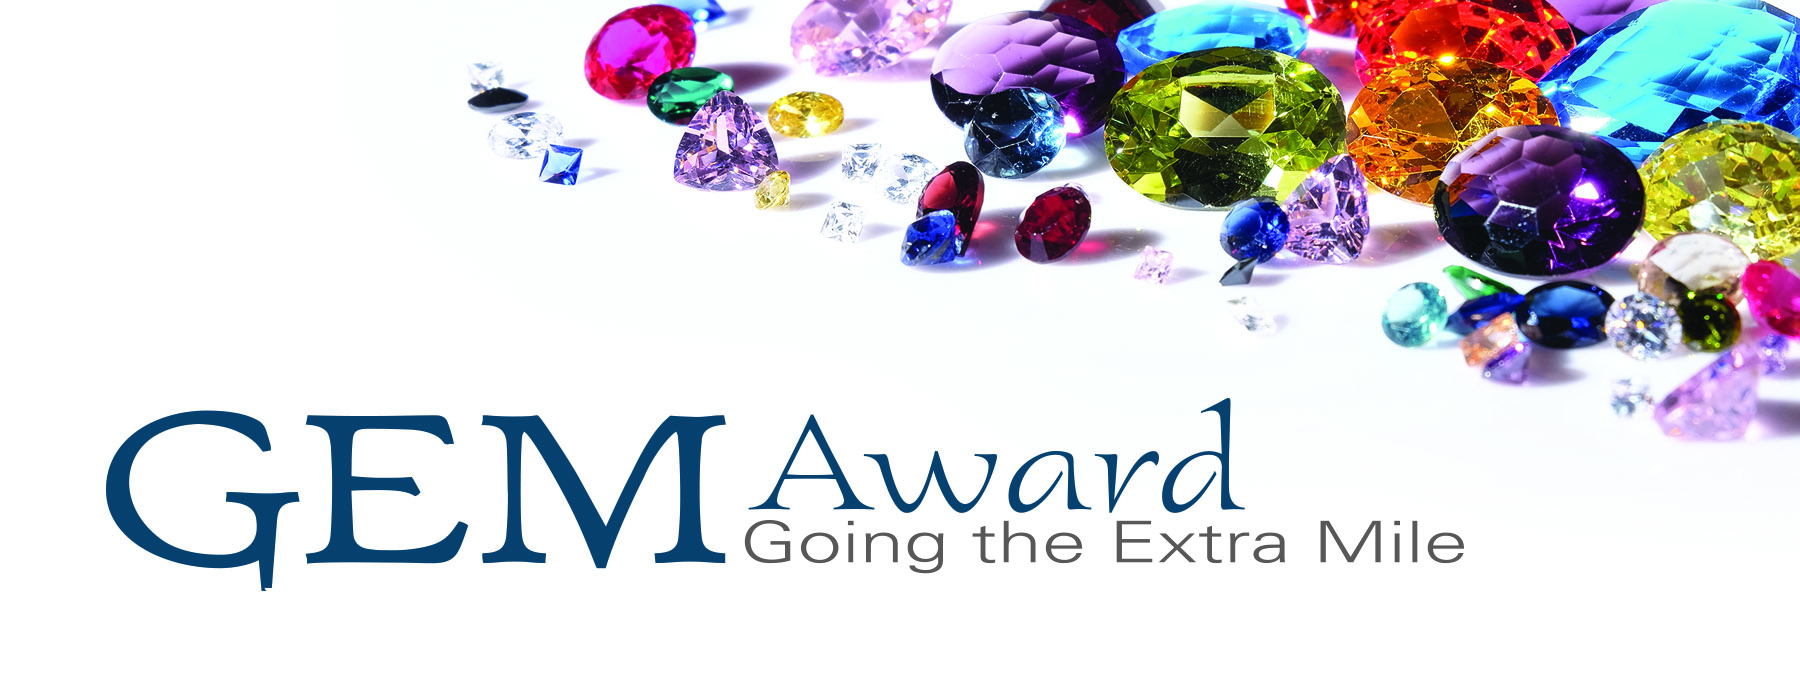 AIMS project team recognized with award for “Going the Extra Mile”